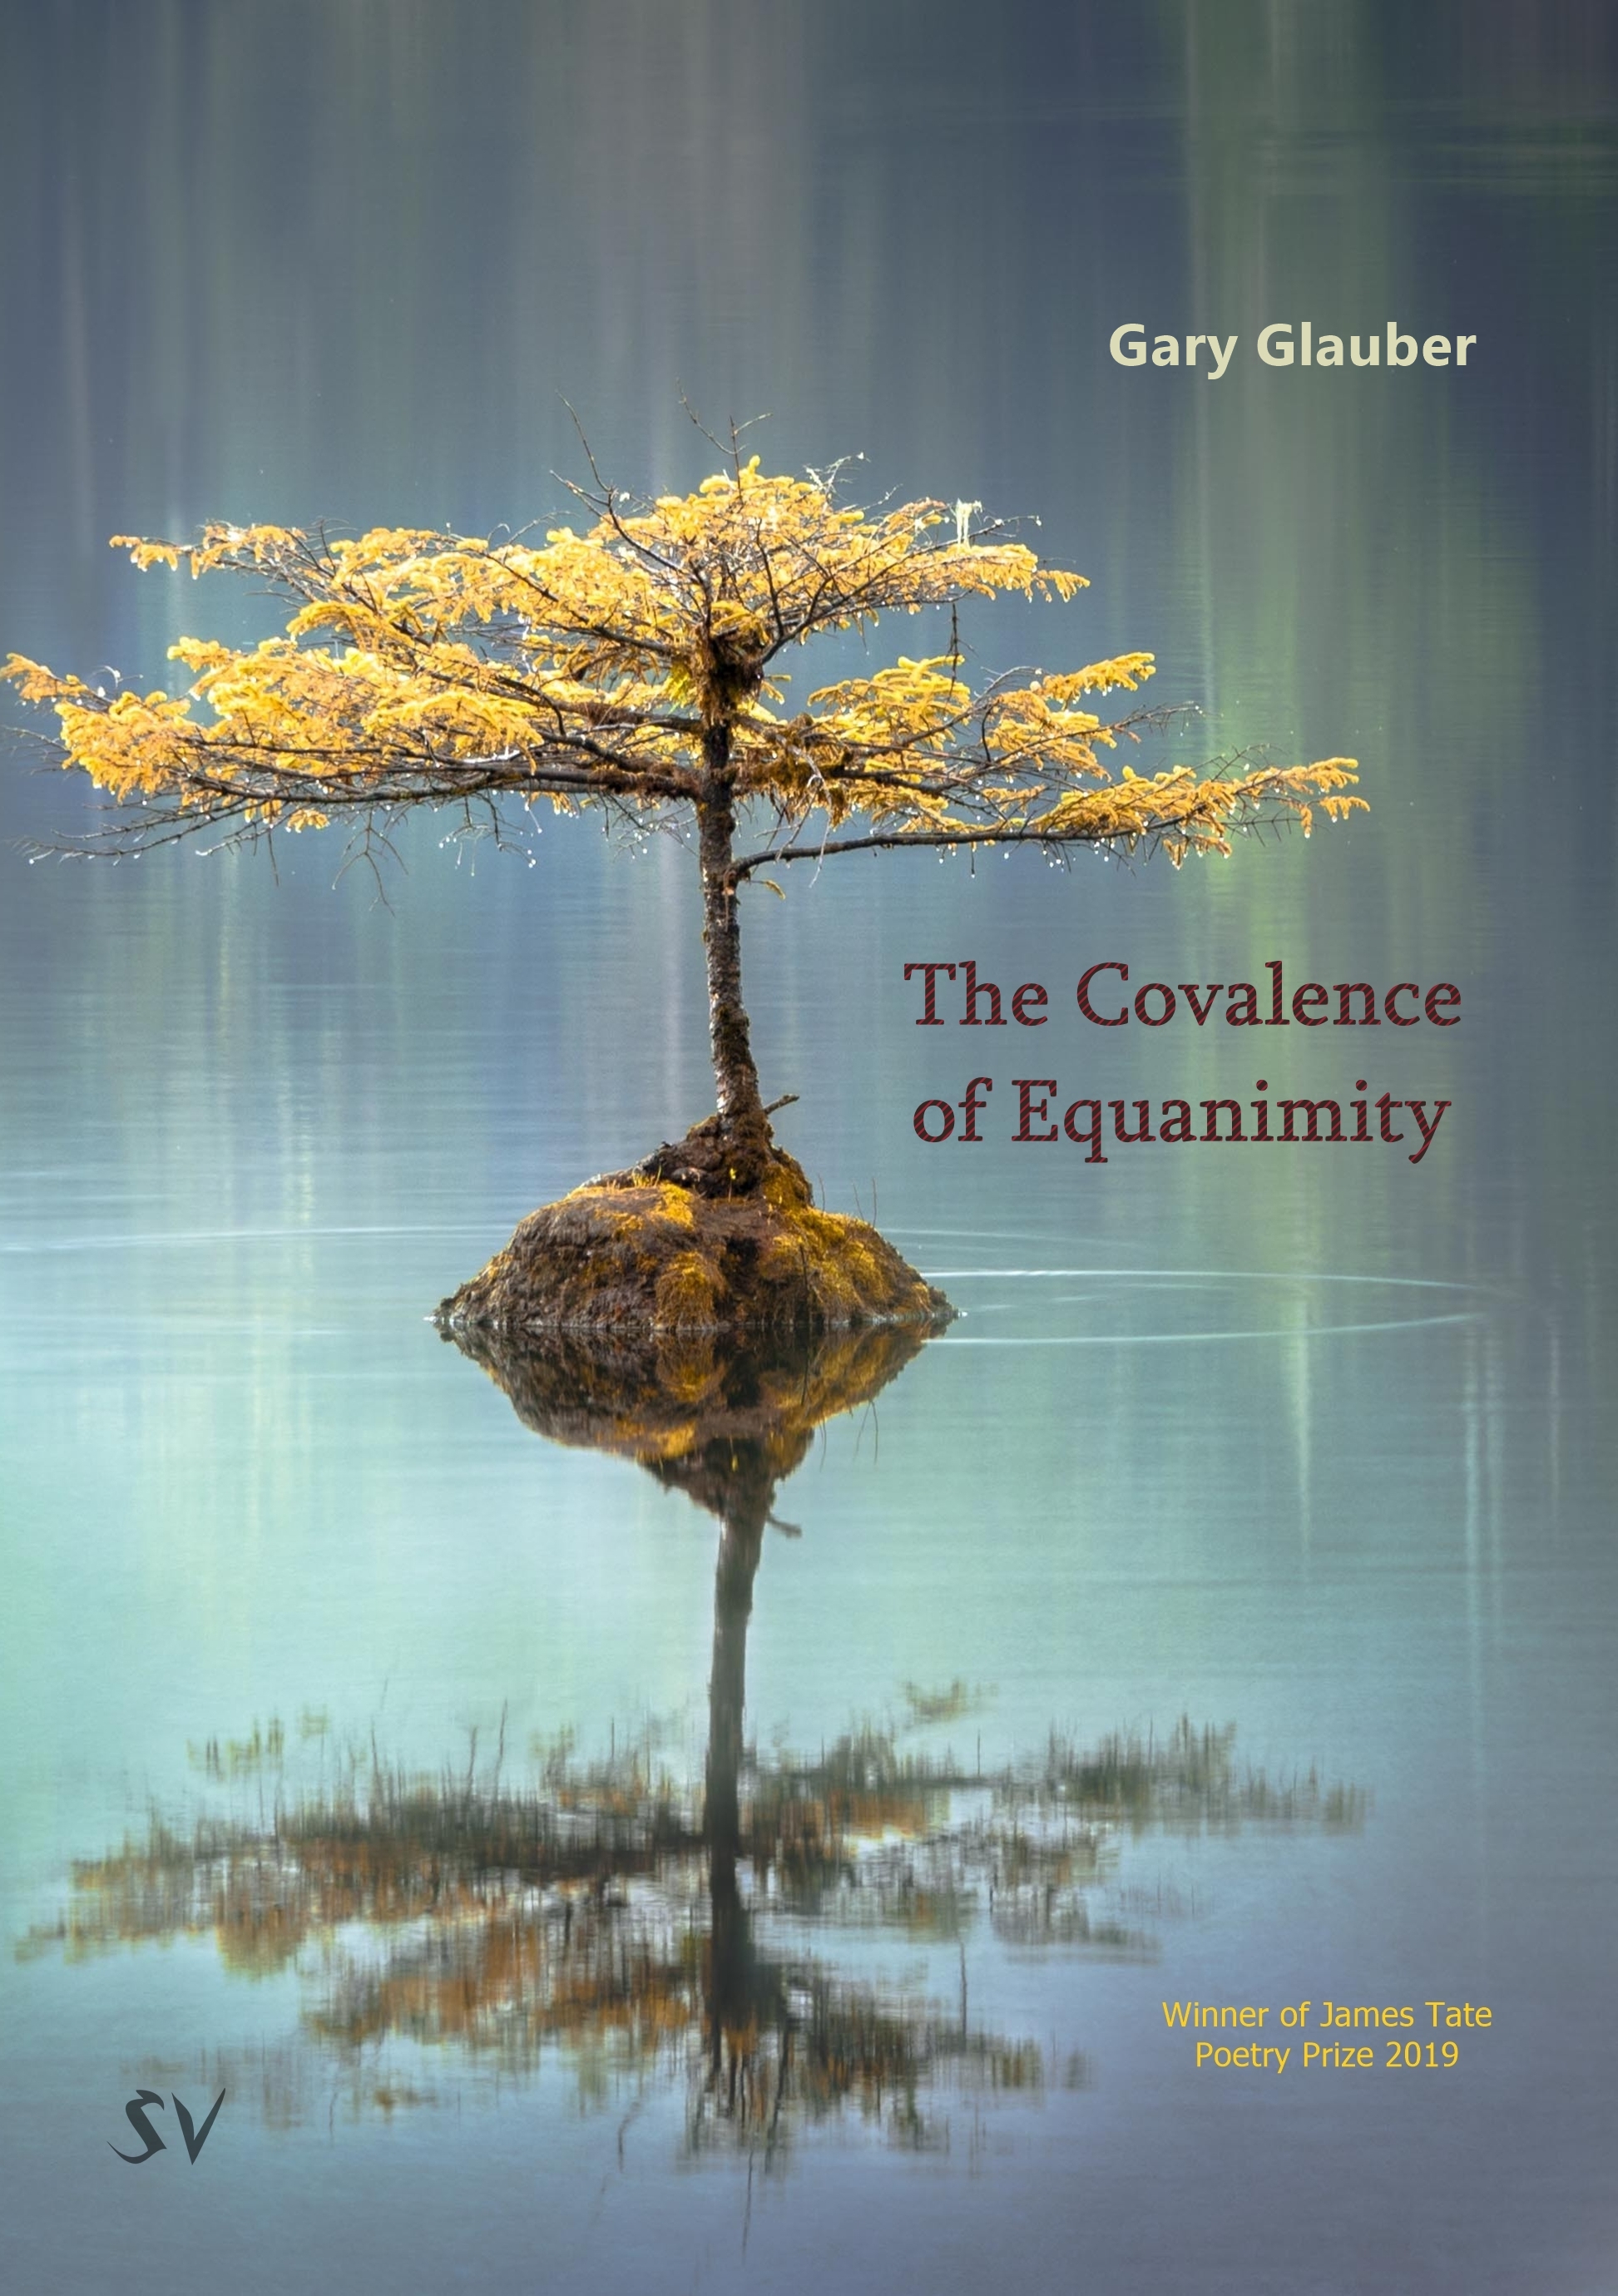 The Covalence of Equanimity